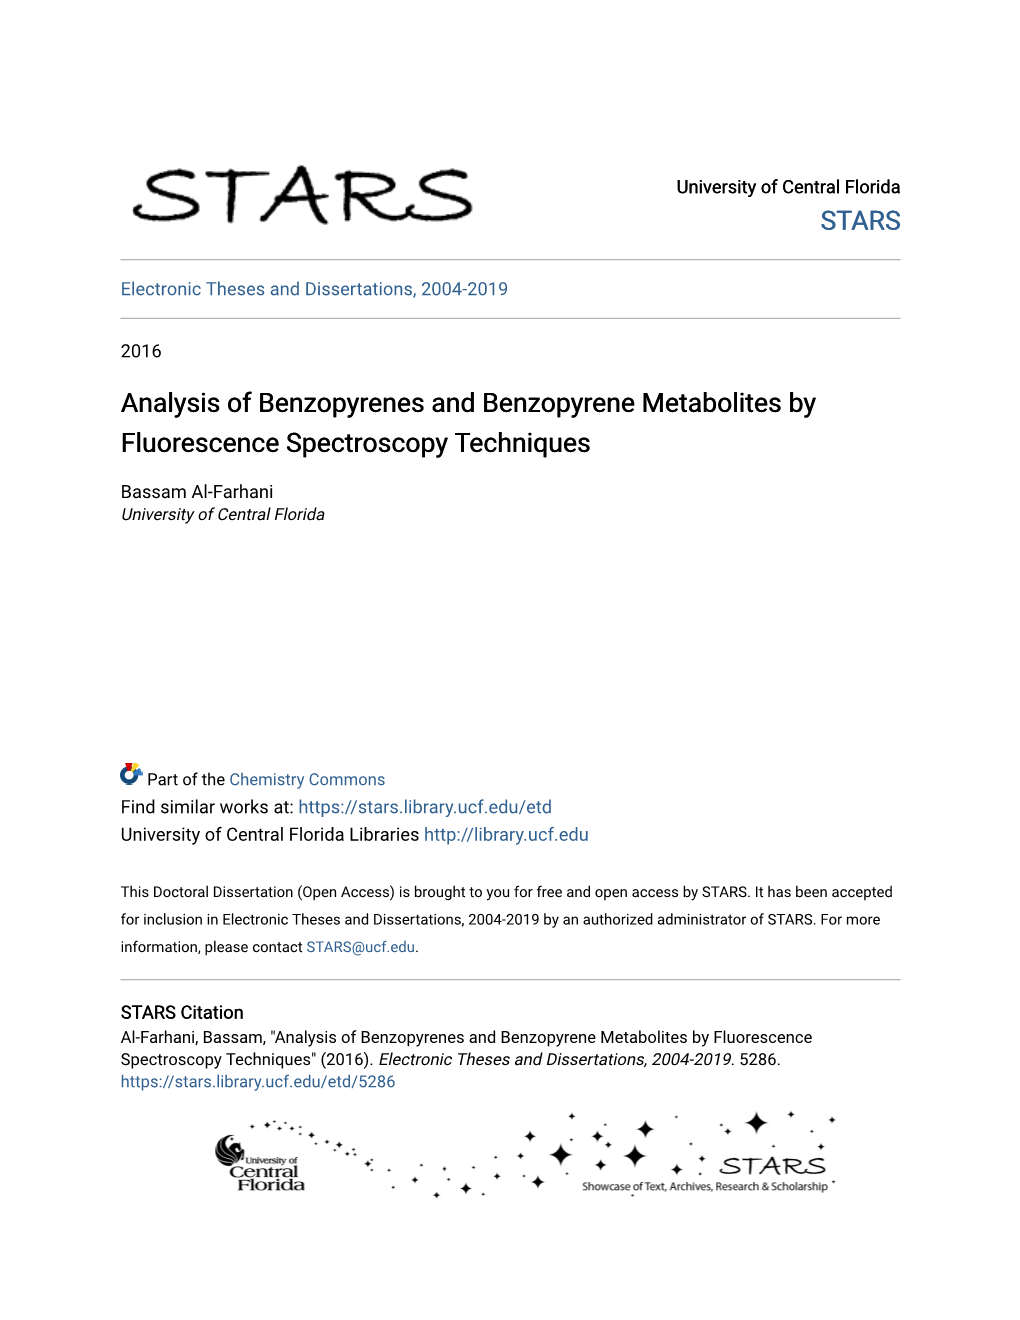 Analysis of Benzopyrenes and Benzopyrene Metabolites by Fluorescence Spectroscopy Techniques